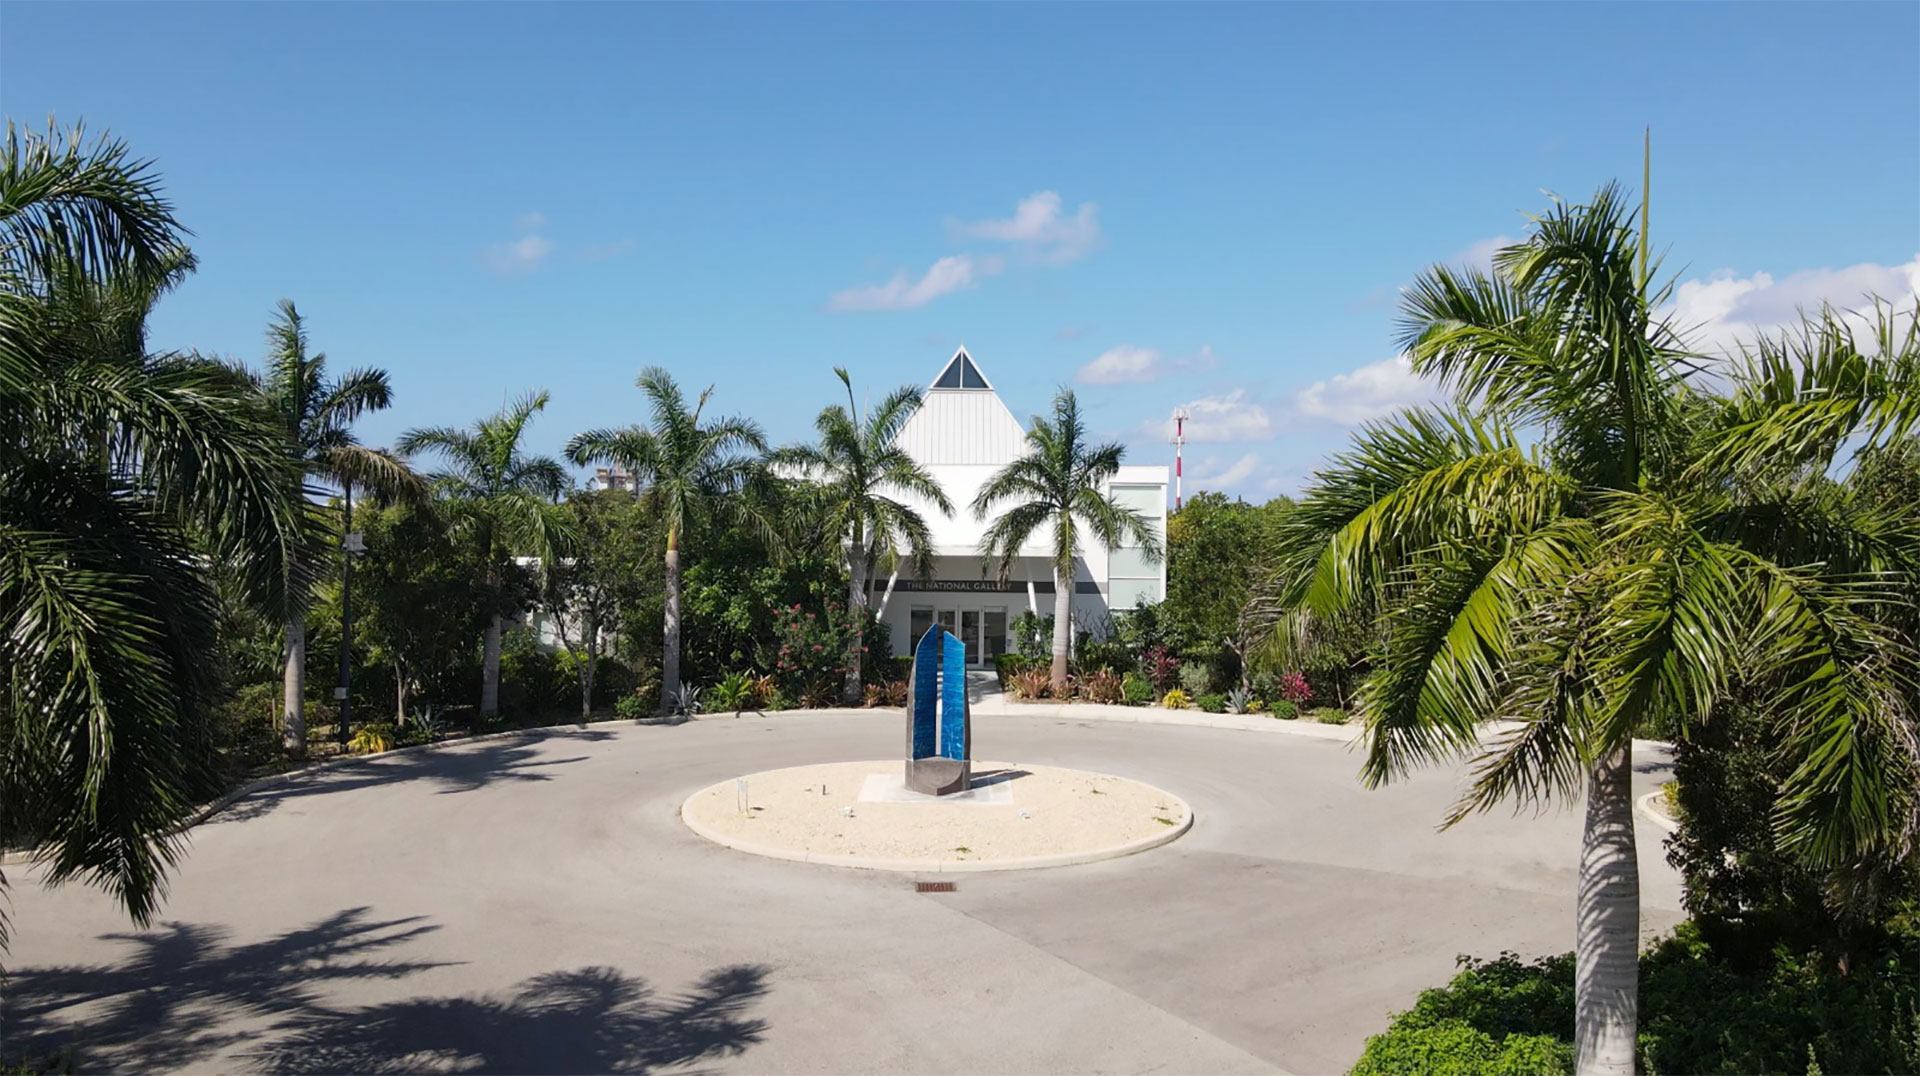 The National Gallery of the Cayman Islands